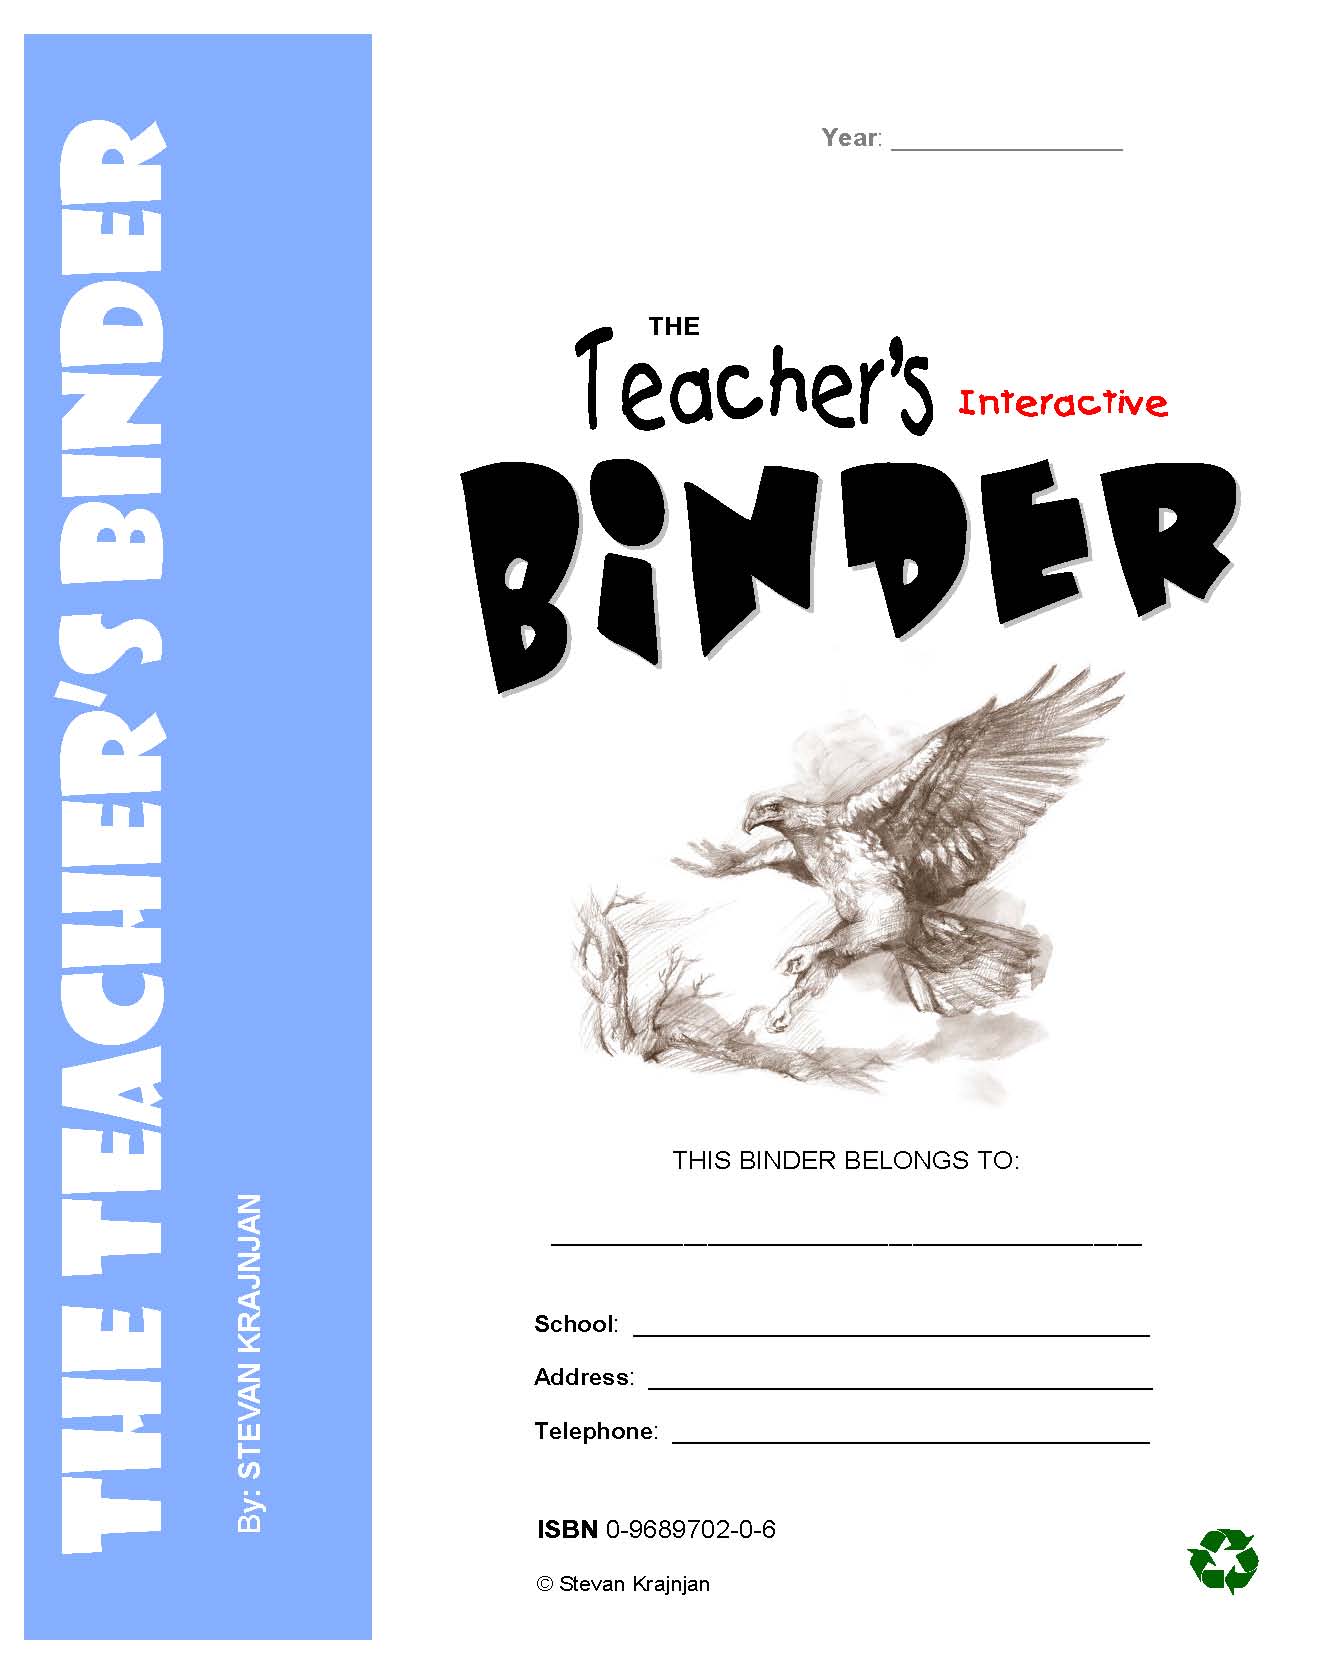 TEACHER'S BINDER - Interactive, often-used classroom forms, worksheets and templates for ALL teachers